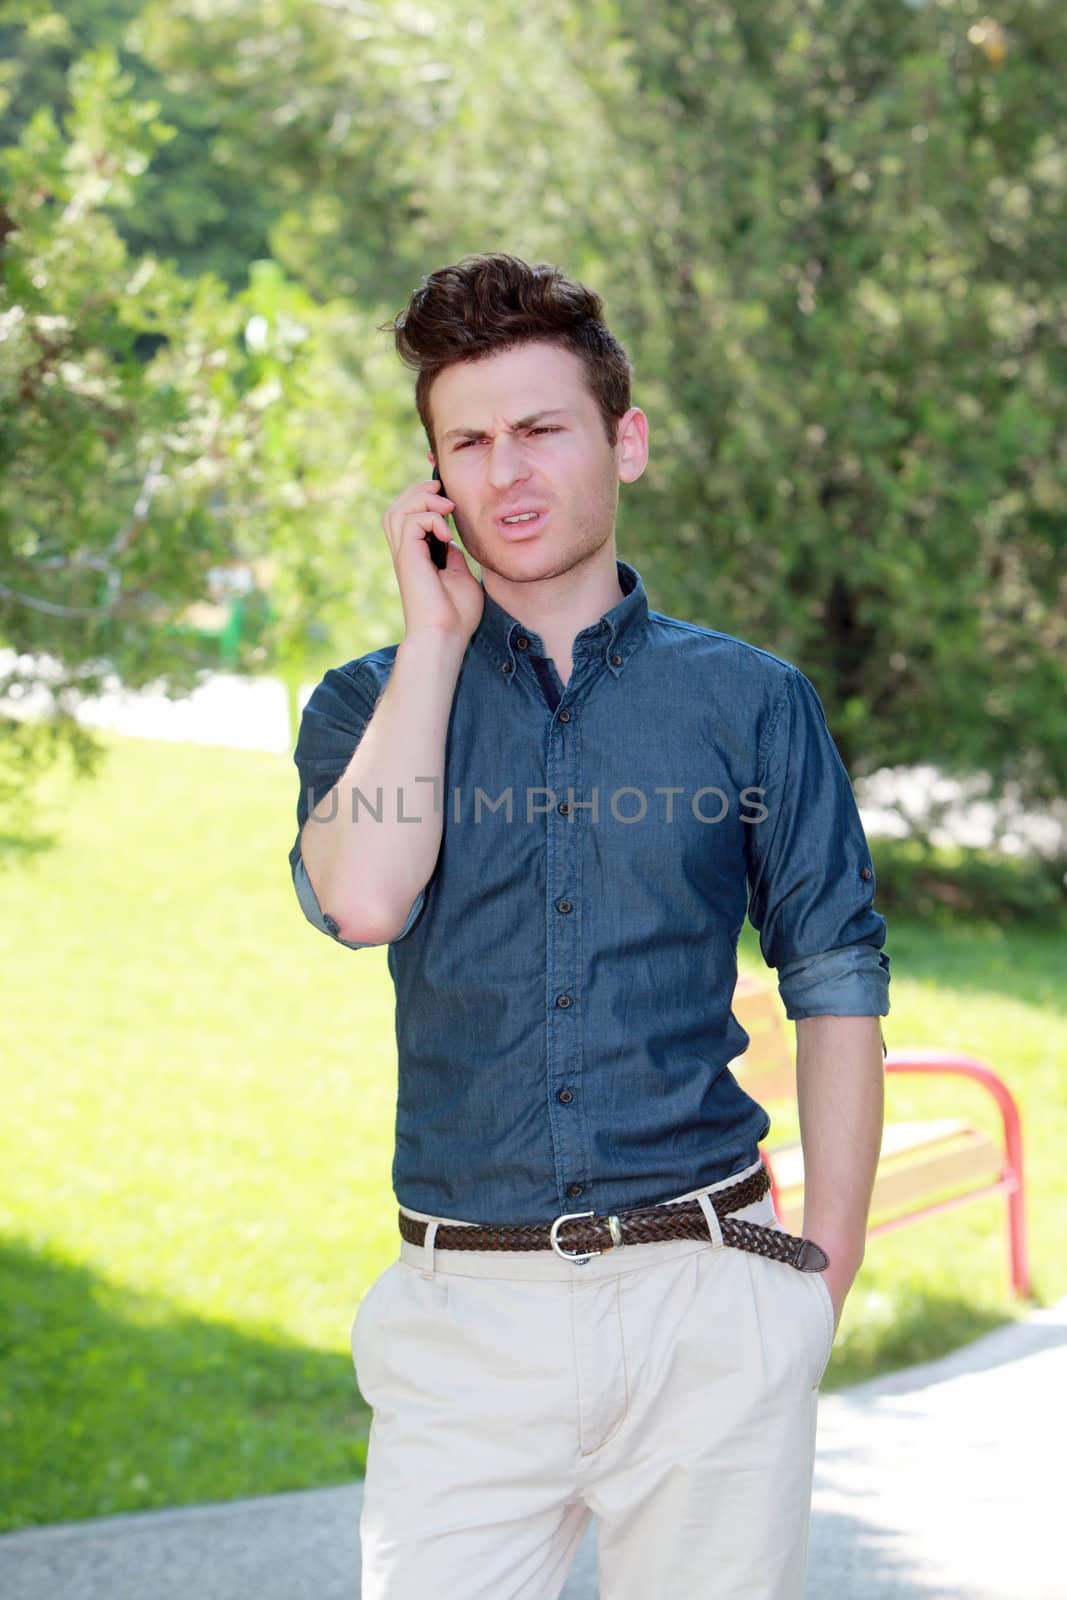 Unhappy man in park on telephone by shamtor